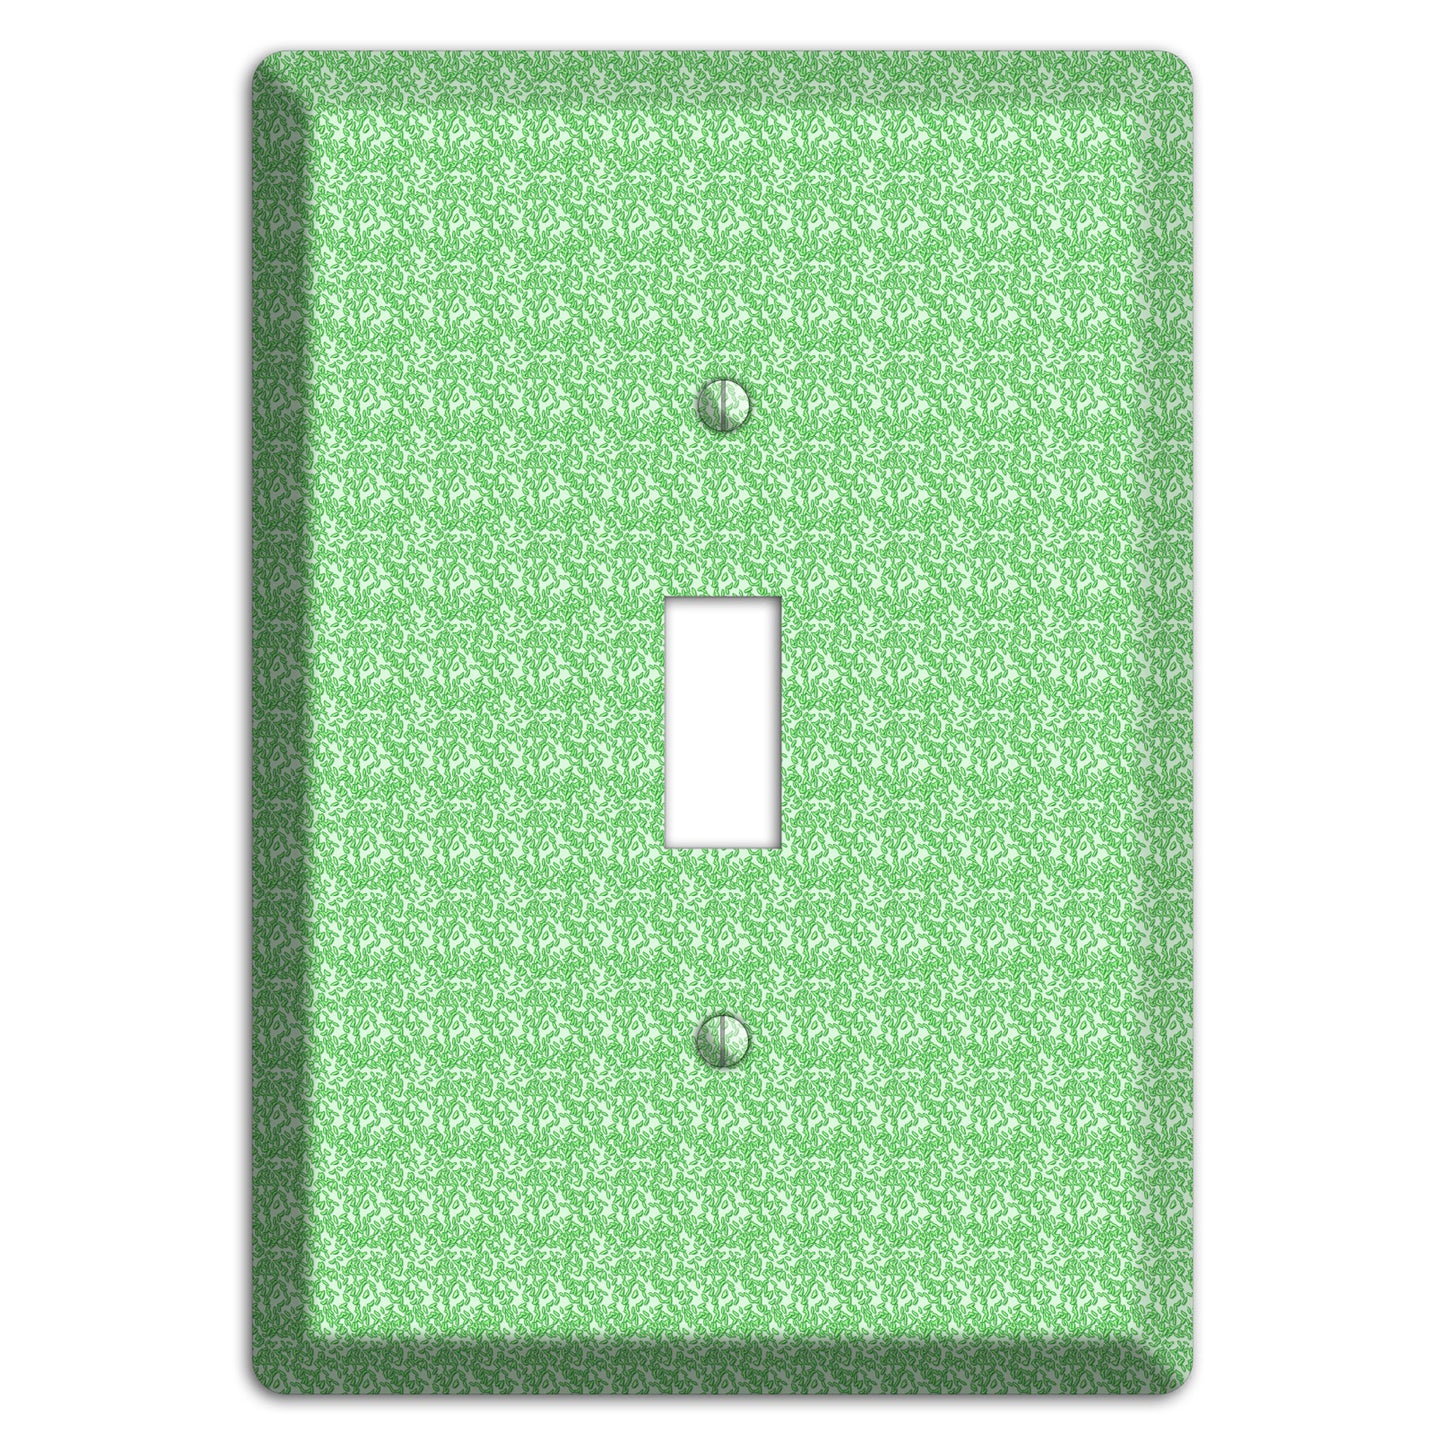 Green Pattern Cover Plates